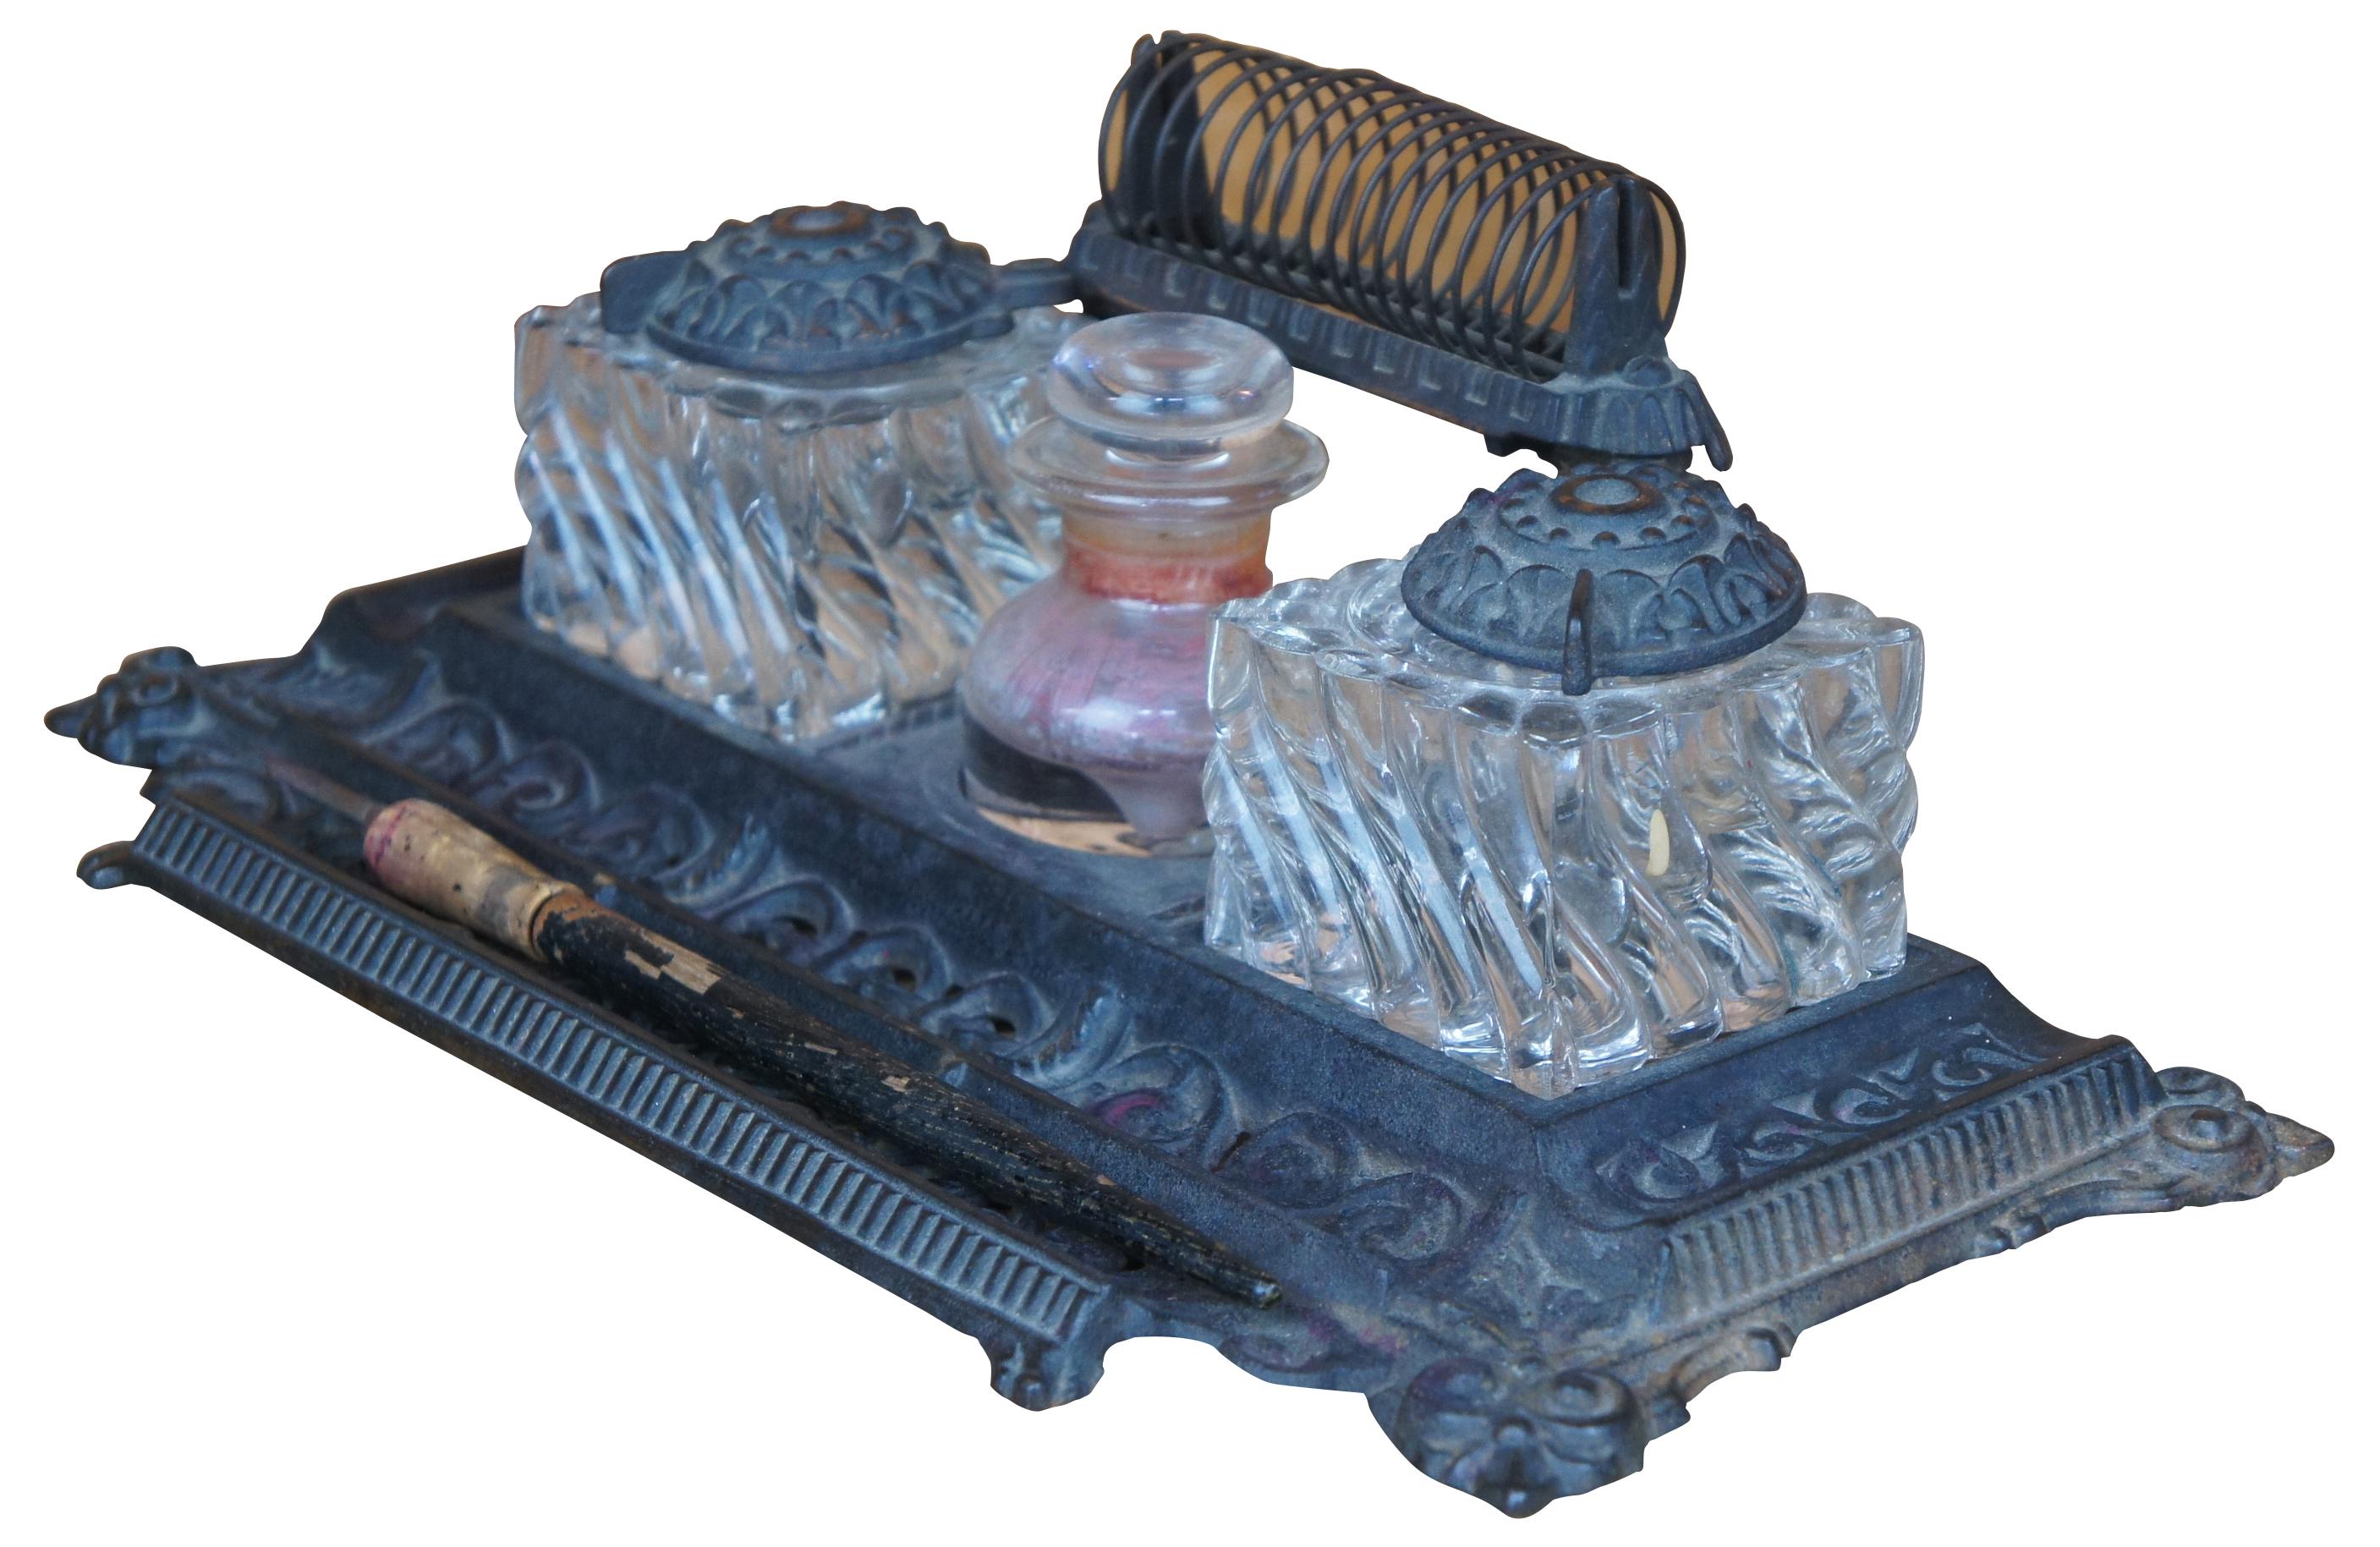 Antique 1892 cast iron desk set / ink caddy featuring letter holder, pen tray and two glass inkwells made by Tatum's.
 